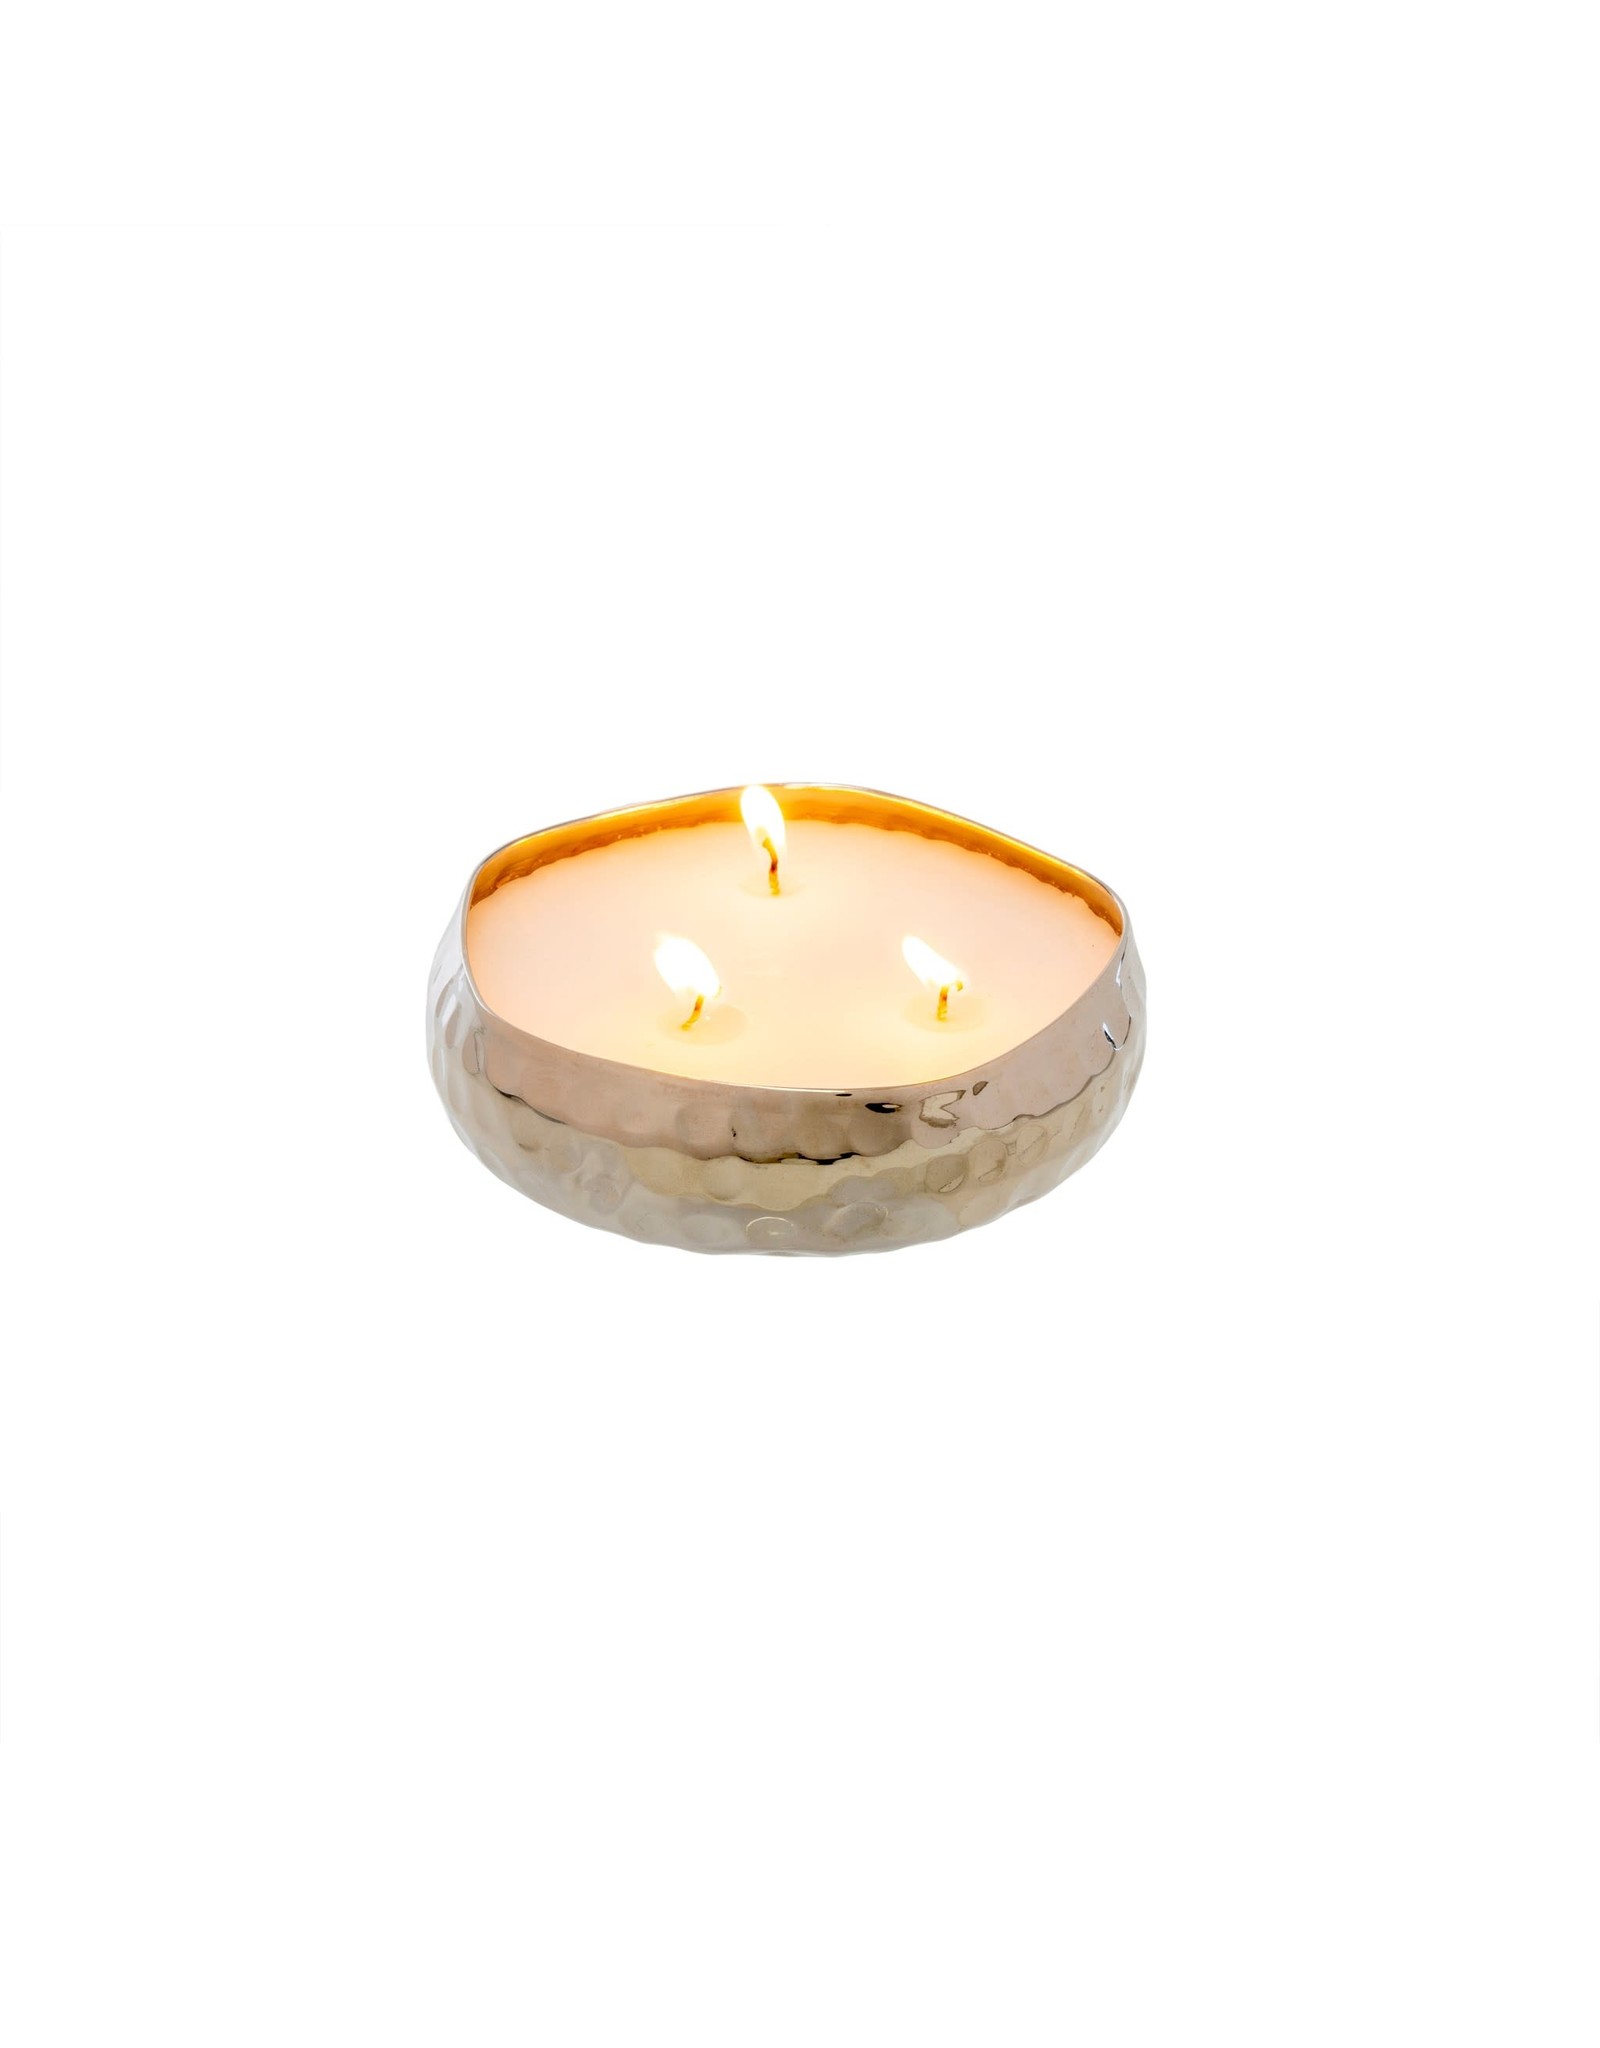 Multi Flame Candle - Amber Spruce